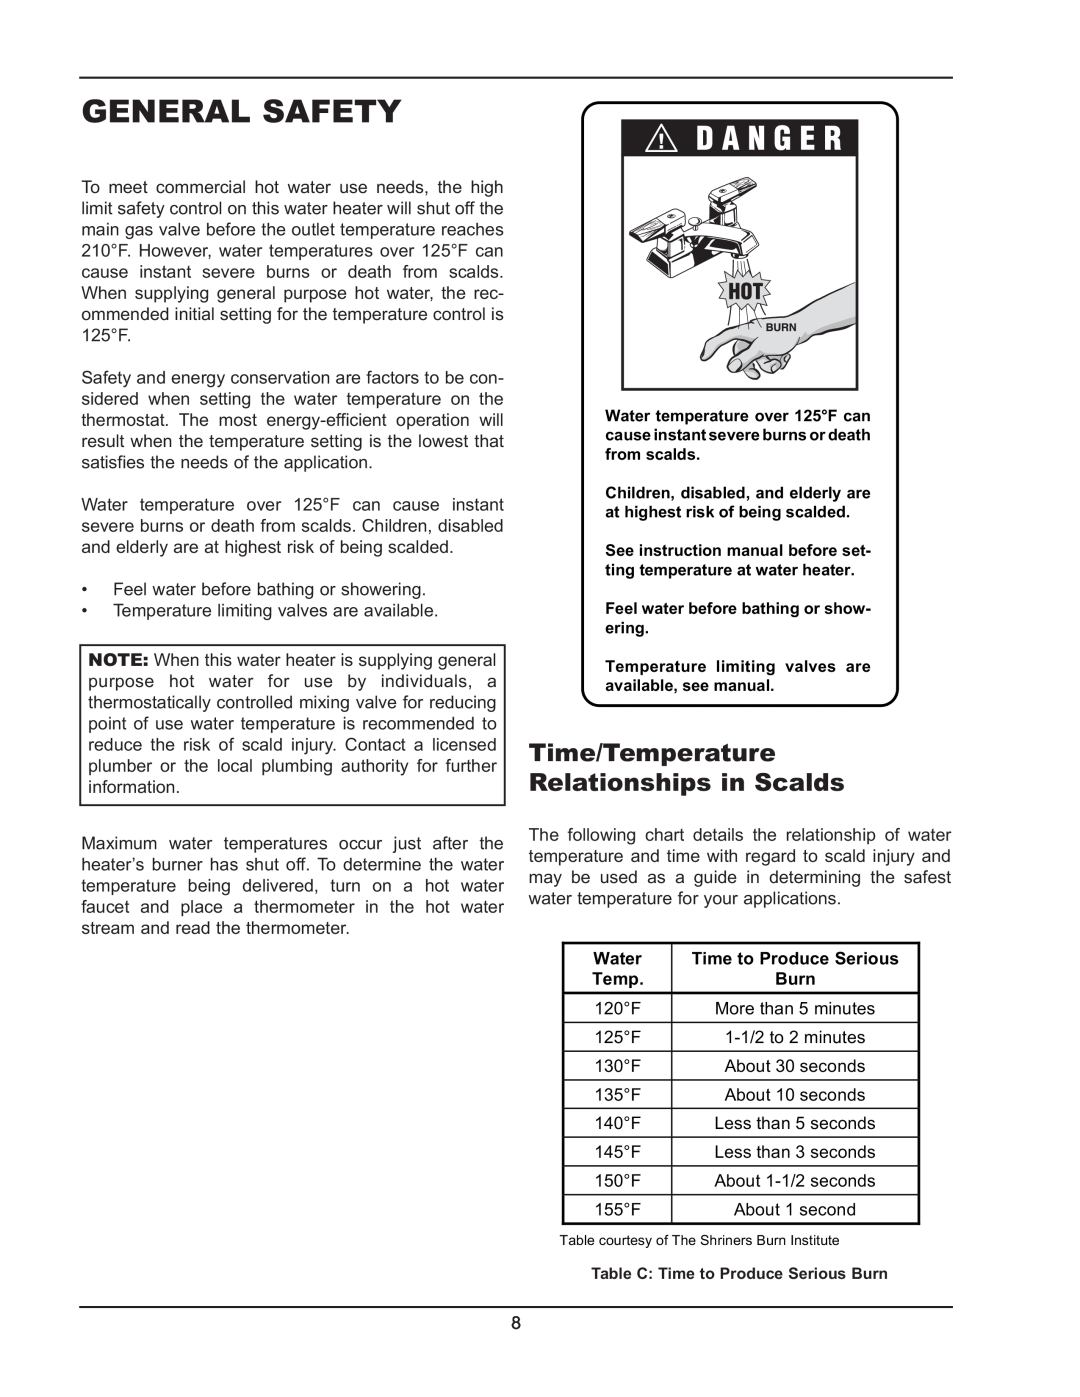 Raypak 122-322 manual General Safety, Time/Temperature Relationships in Scalds 